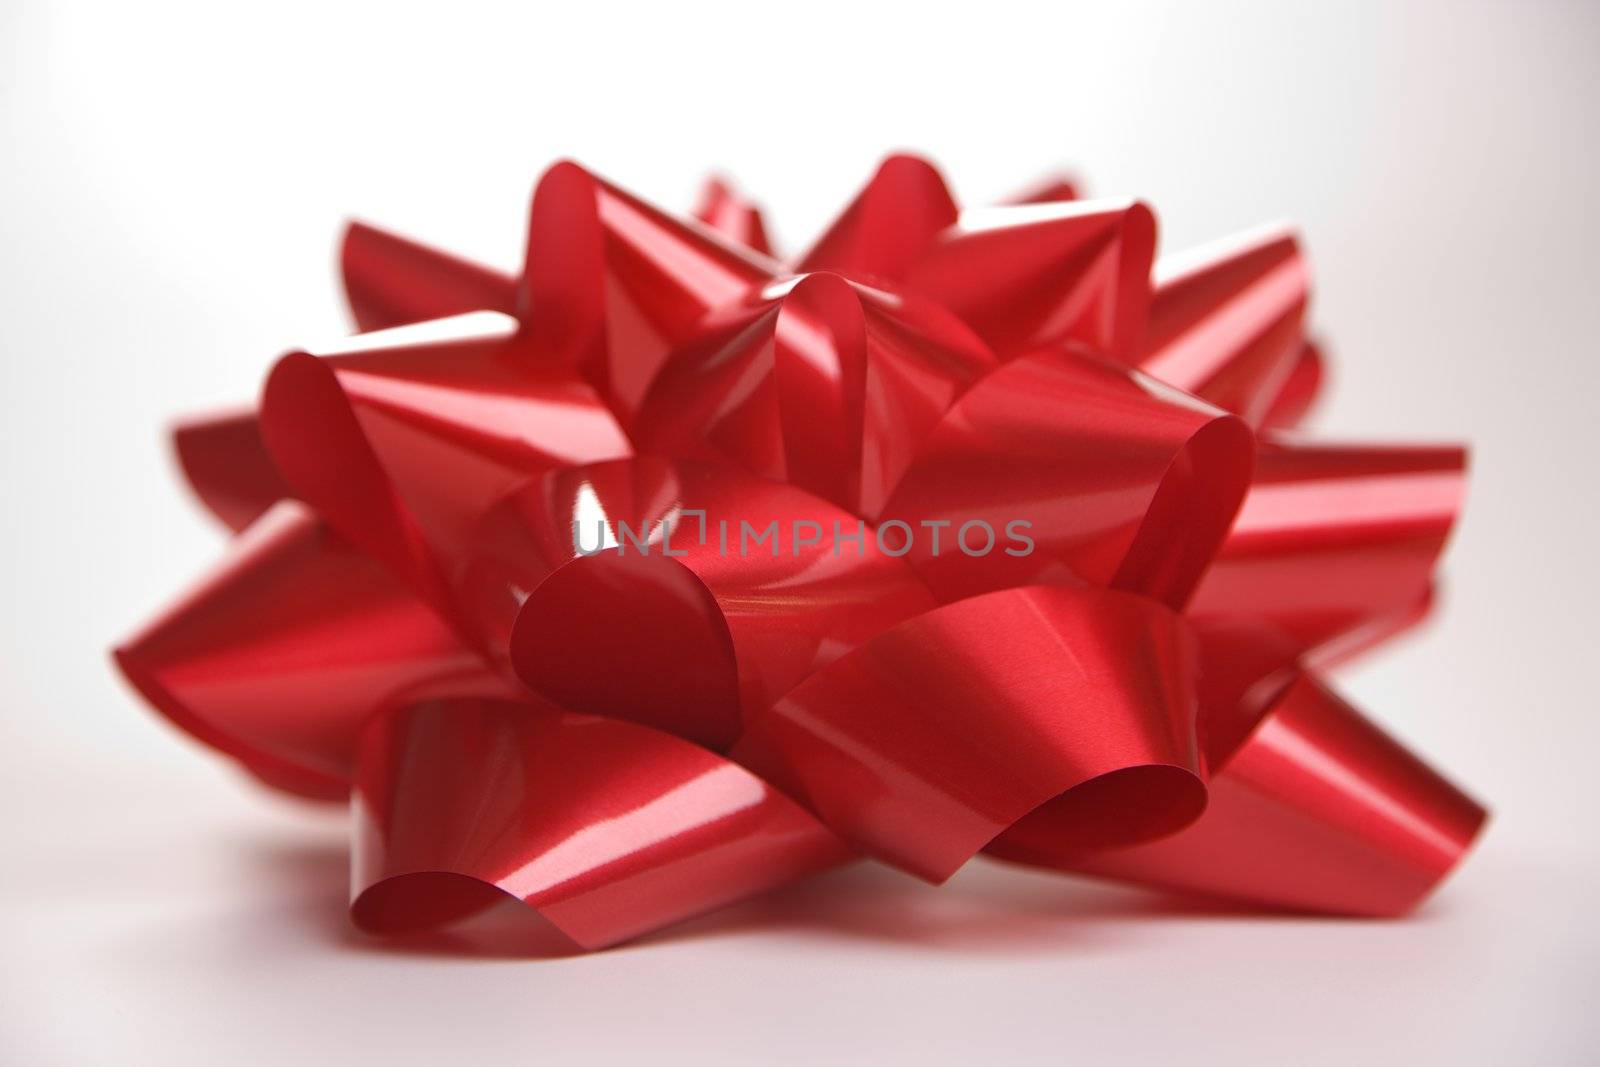 Still life of big red Christmas bow.